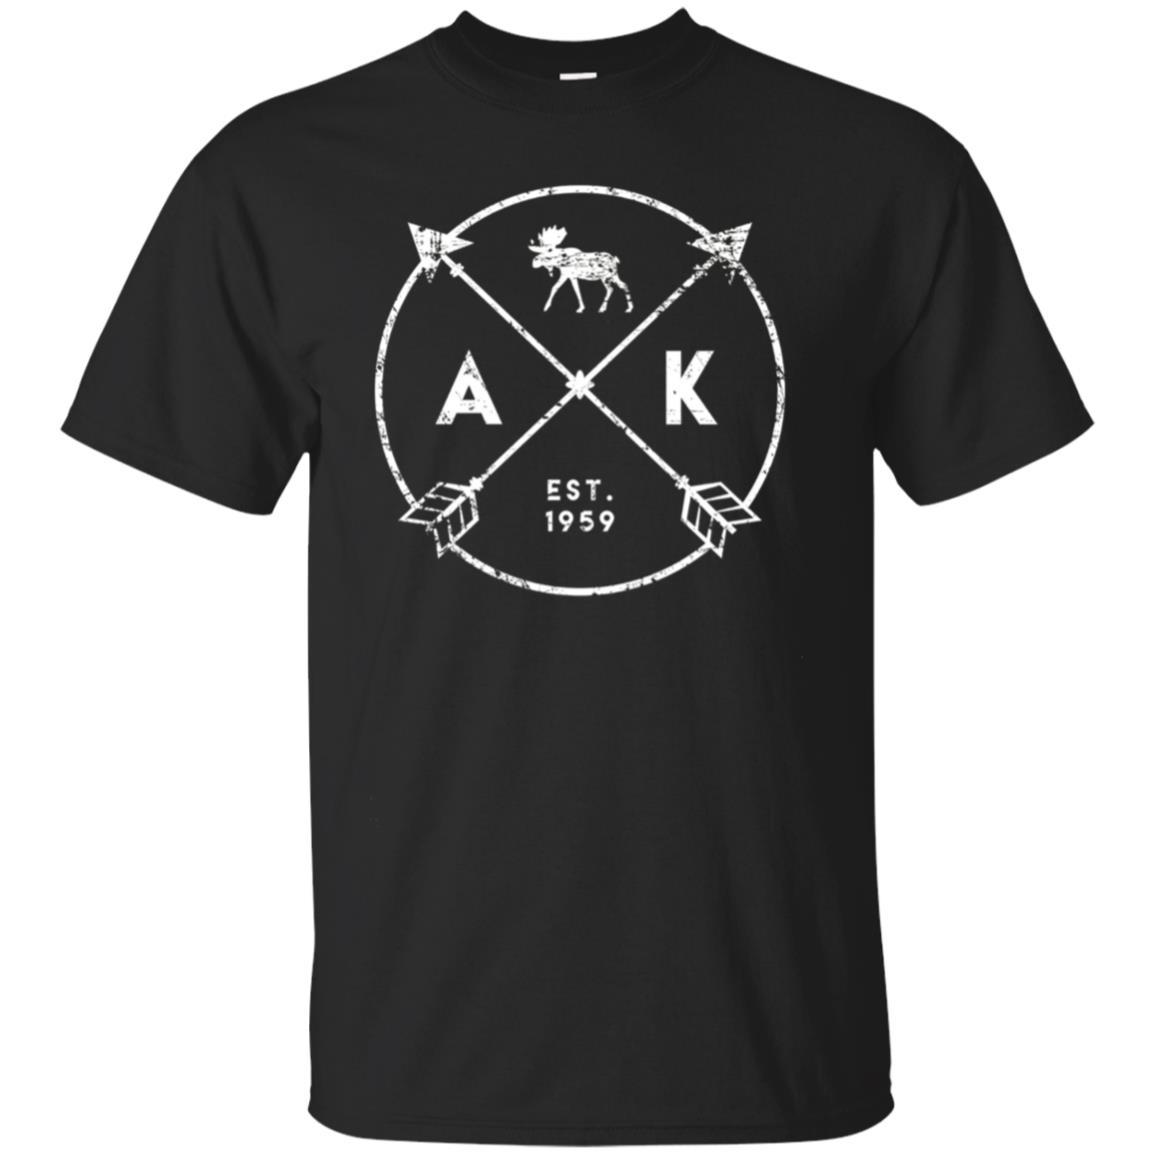 Cover Your Body With Amazing Alaska Adventure Shirt, Est 1959 Moose Arrows State